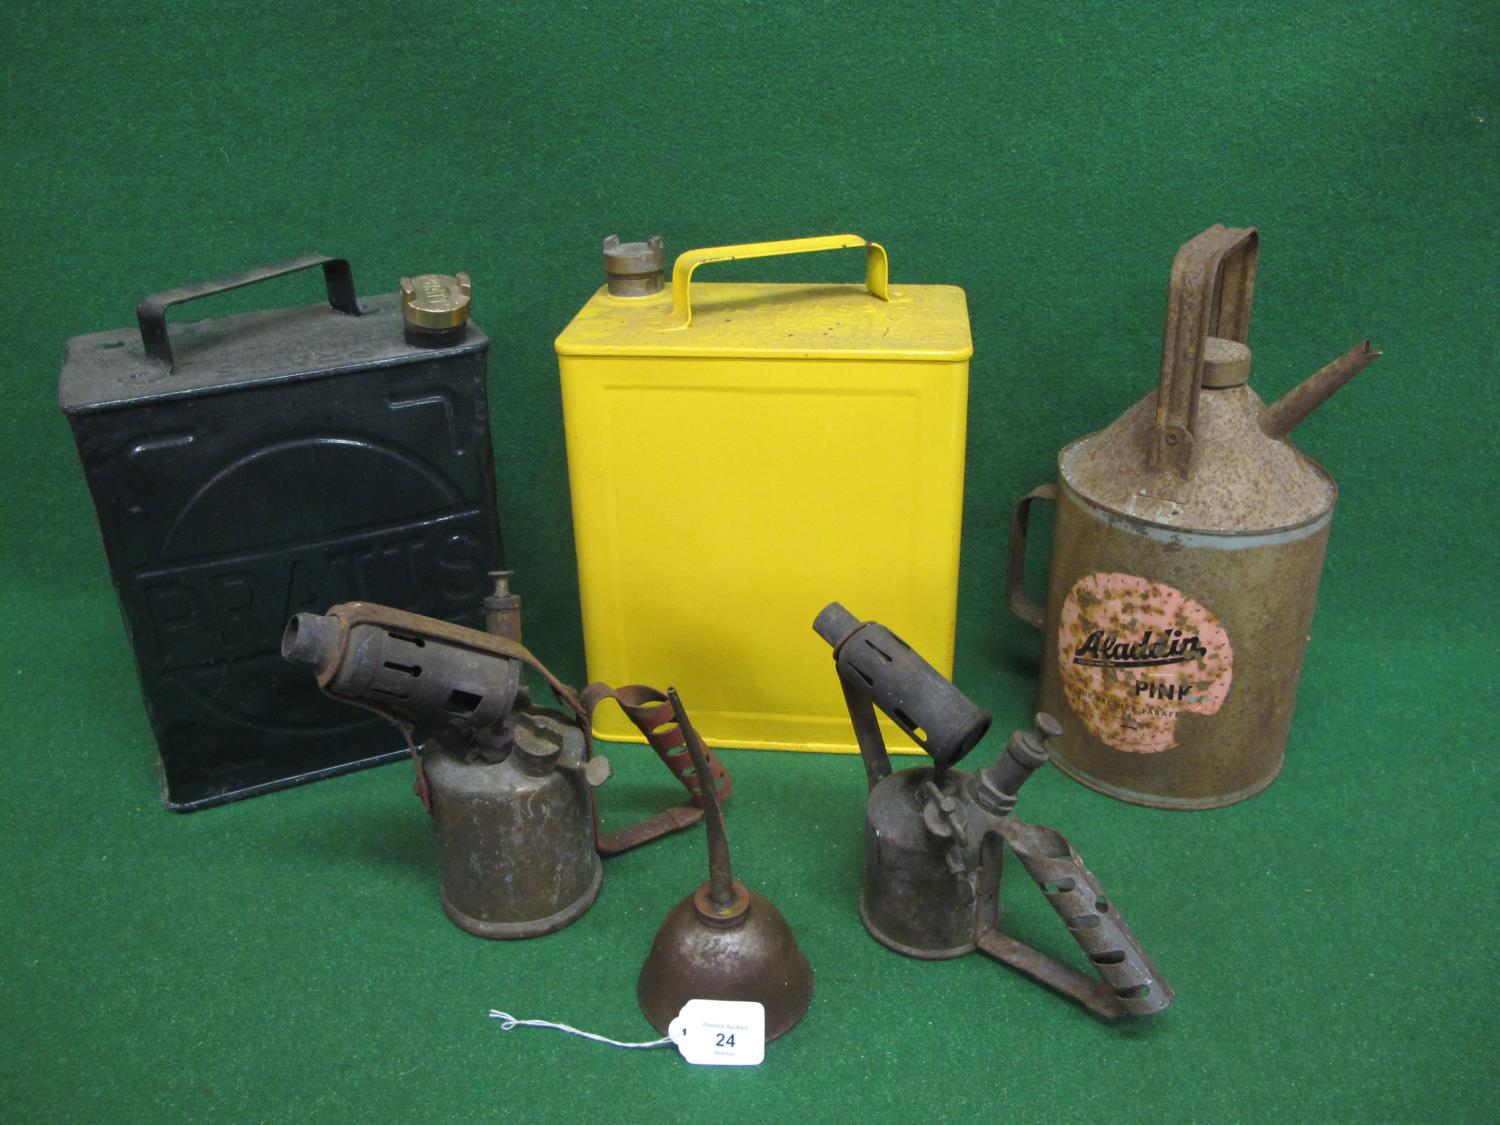 Pratts and plain two gallon fuel cans with caps (restored), two Monitor blow lamps, Aladdin Pink